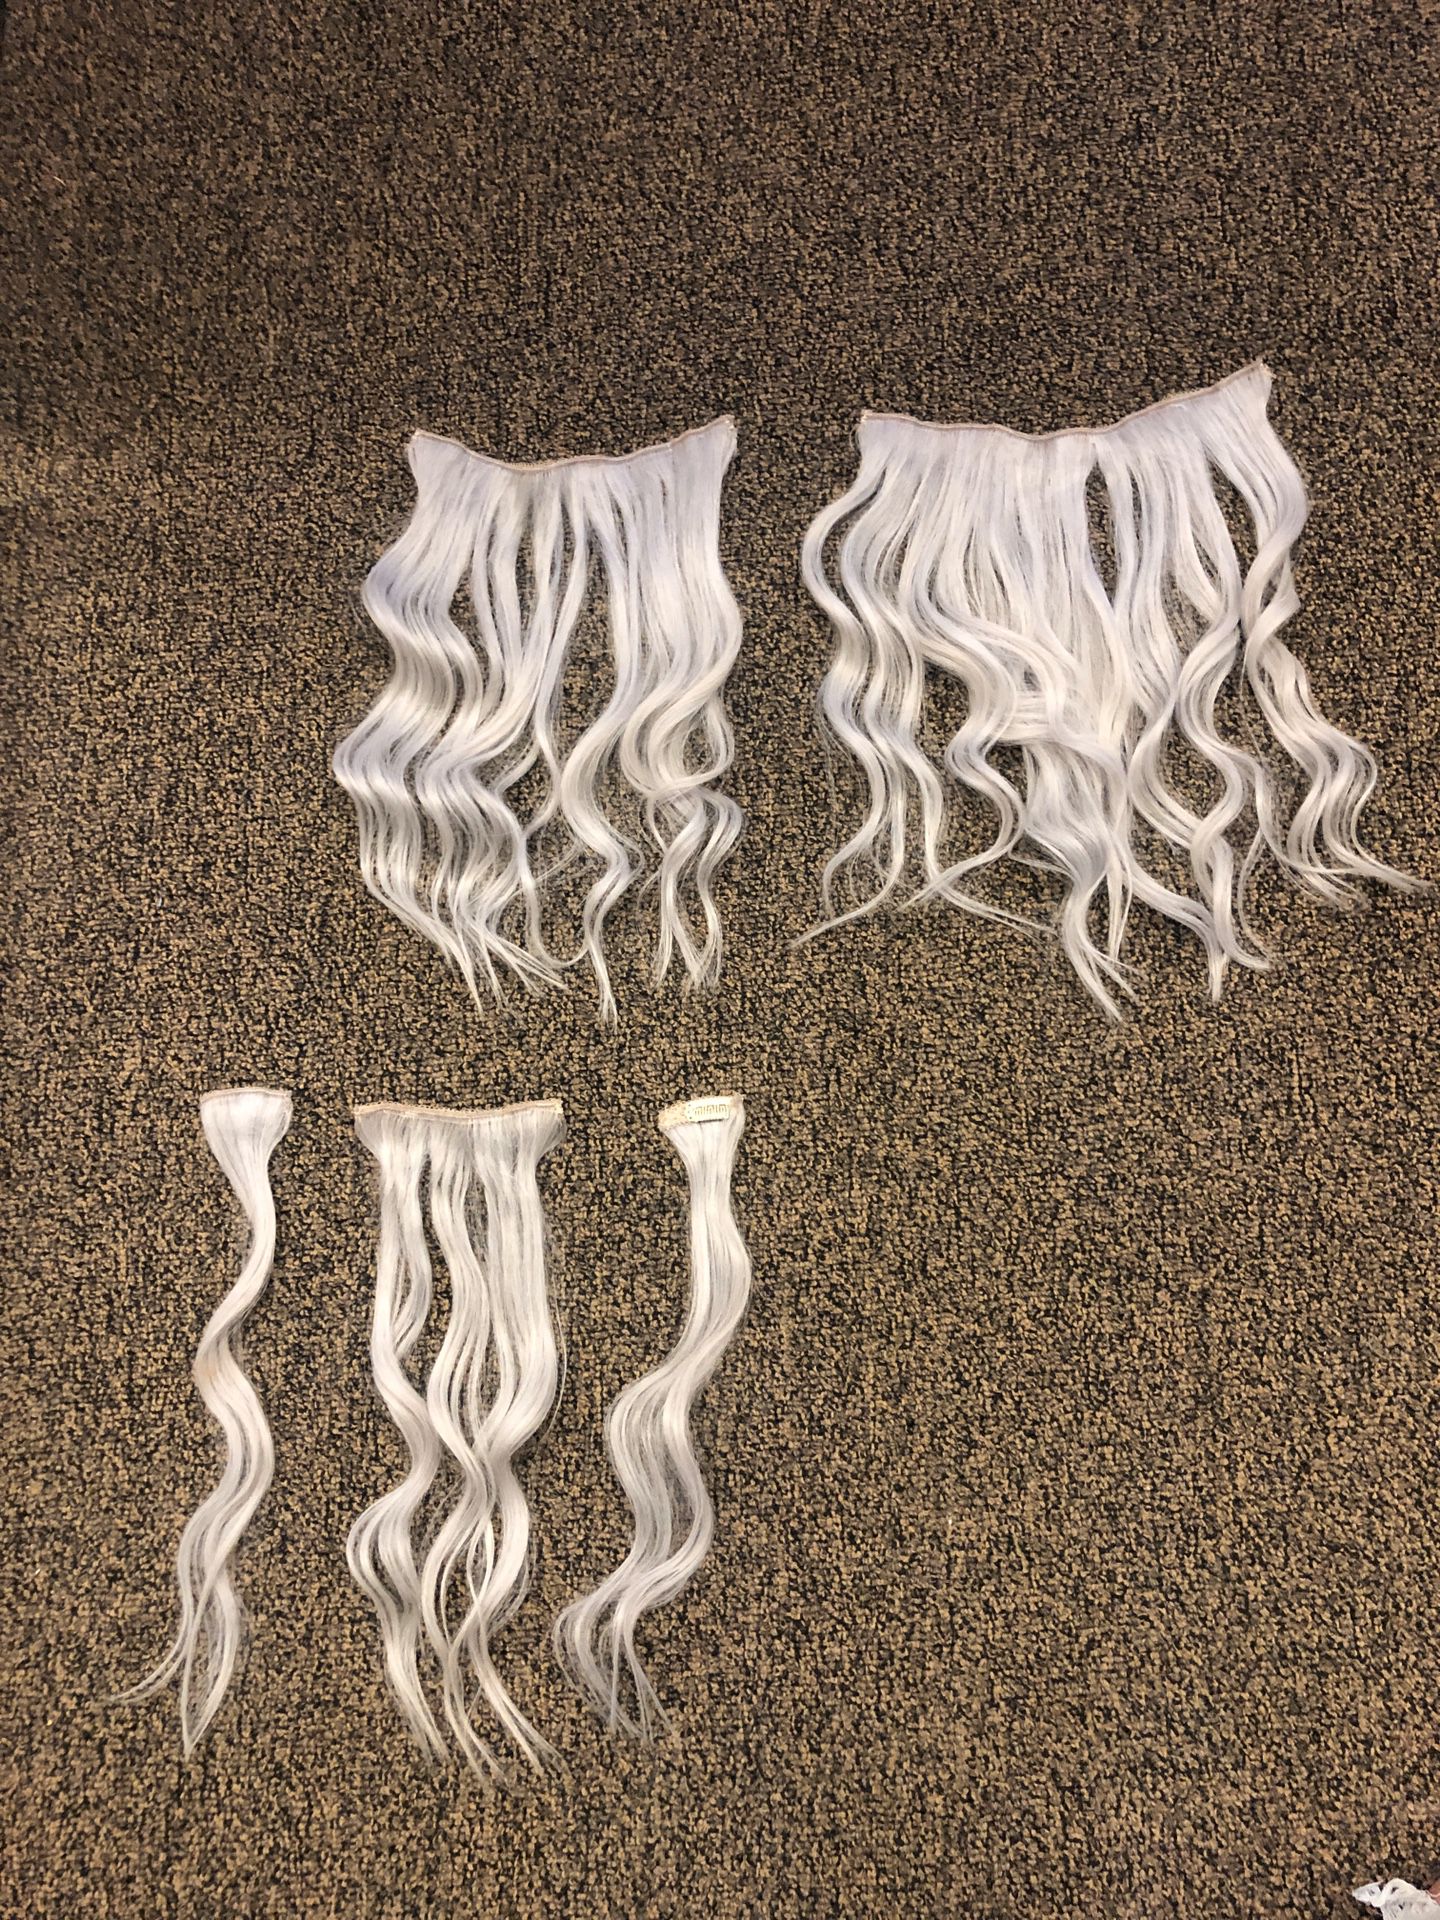 ZALA real hair extensions, 5 piece